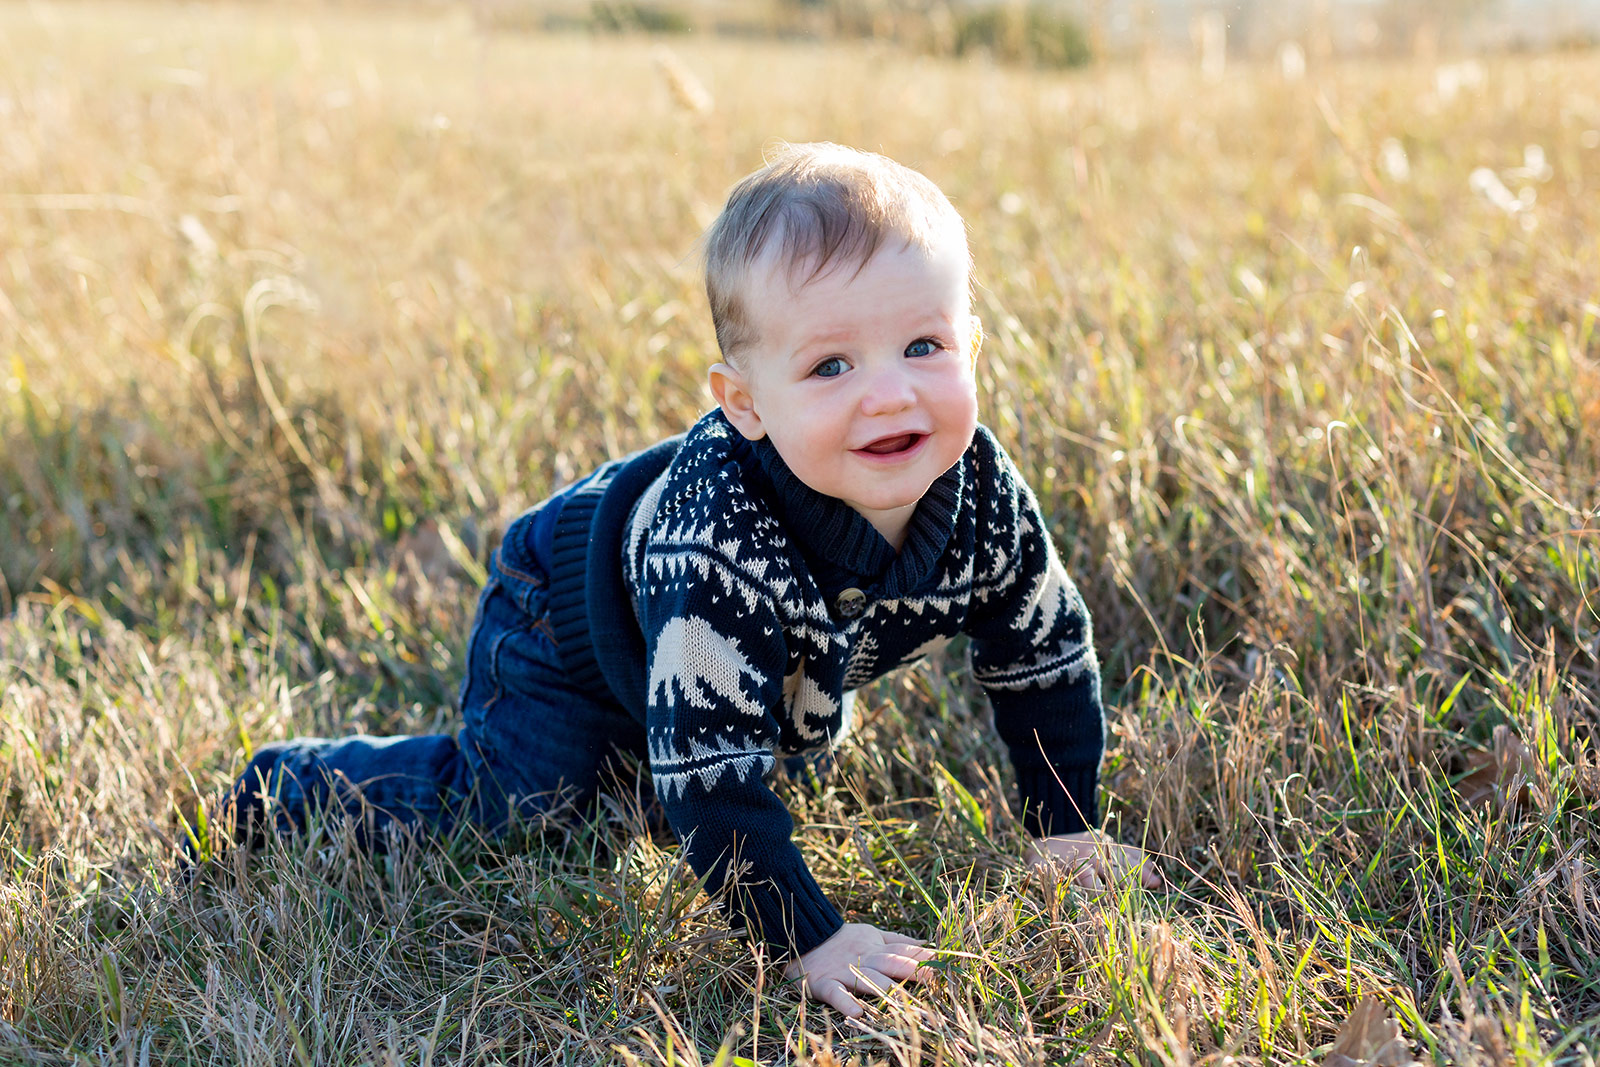 Beckham crawls through the tall grass with a sweet smile on his face.